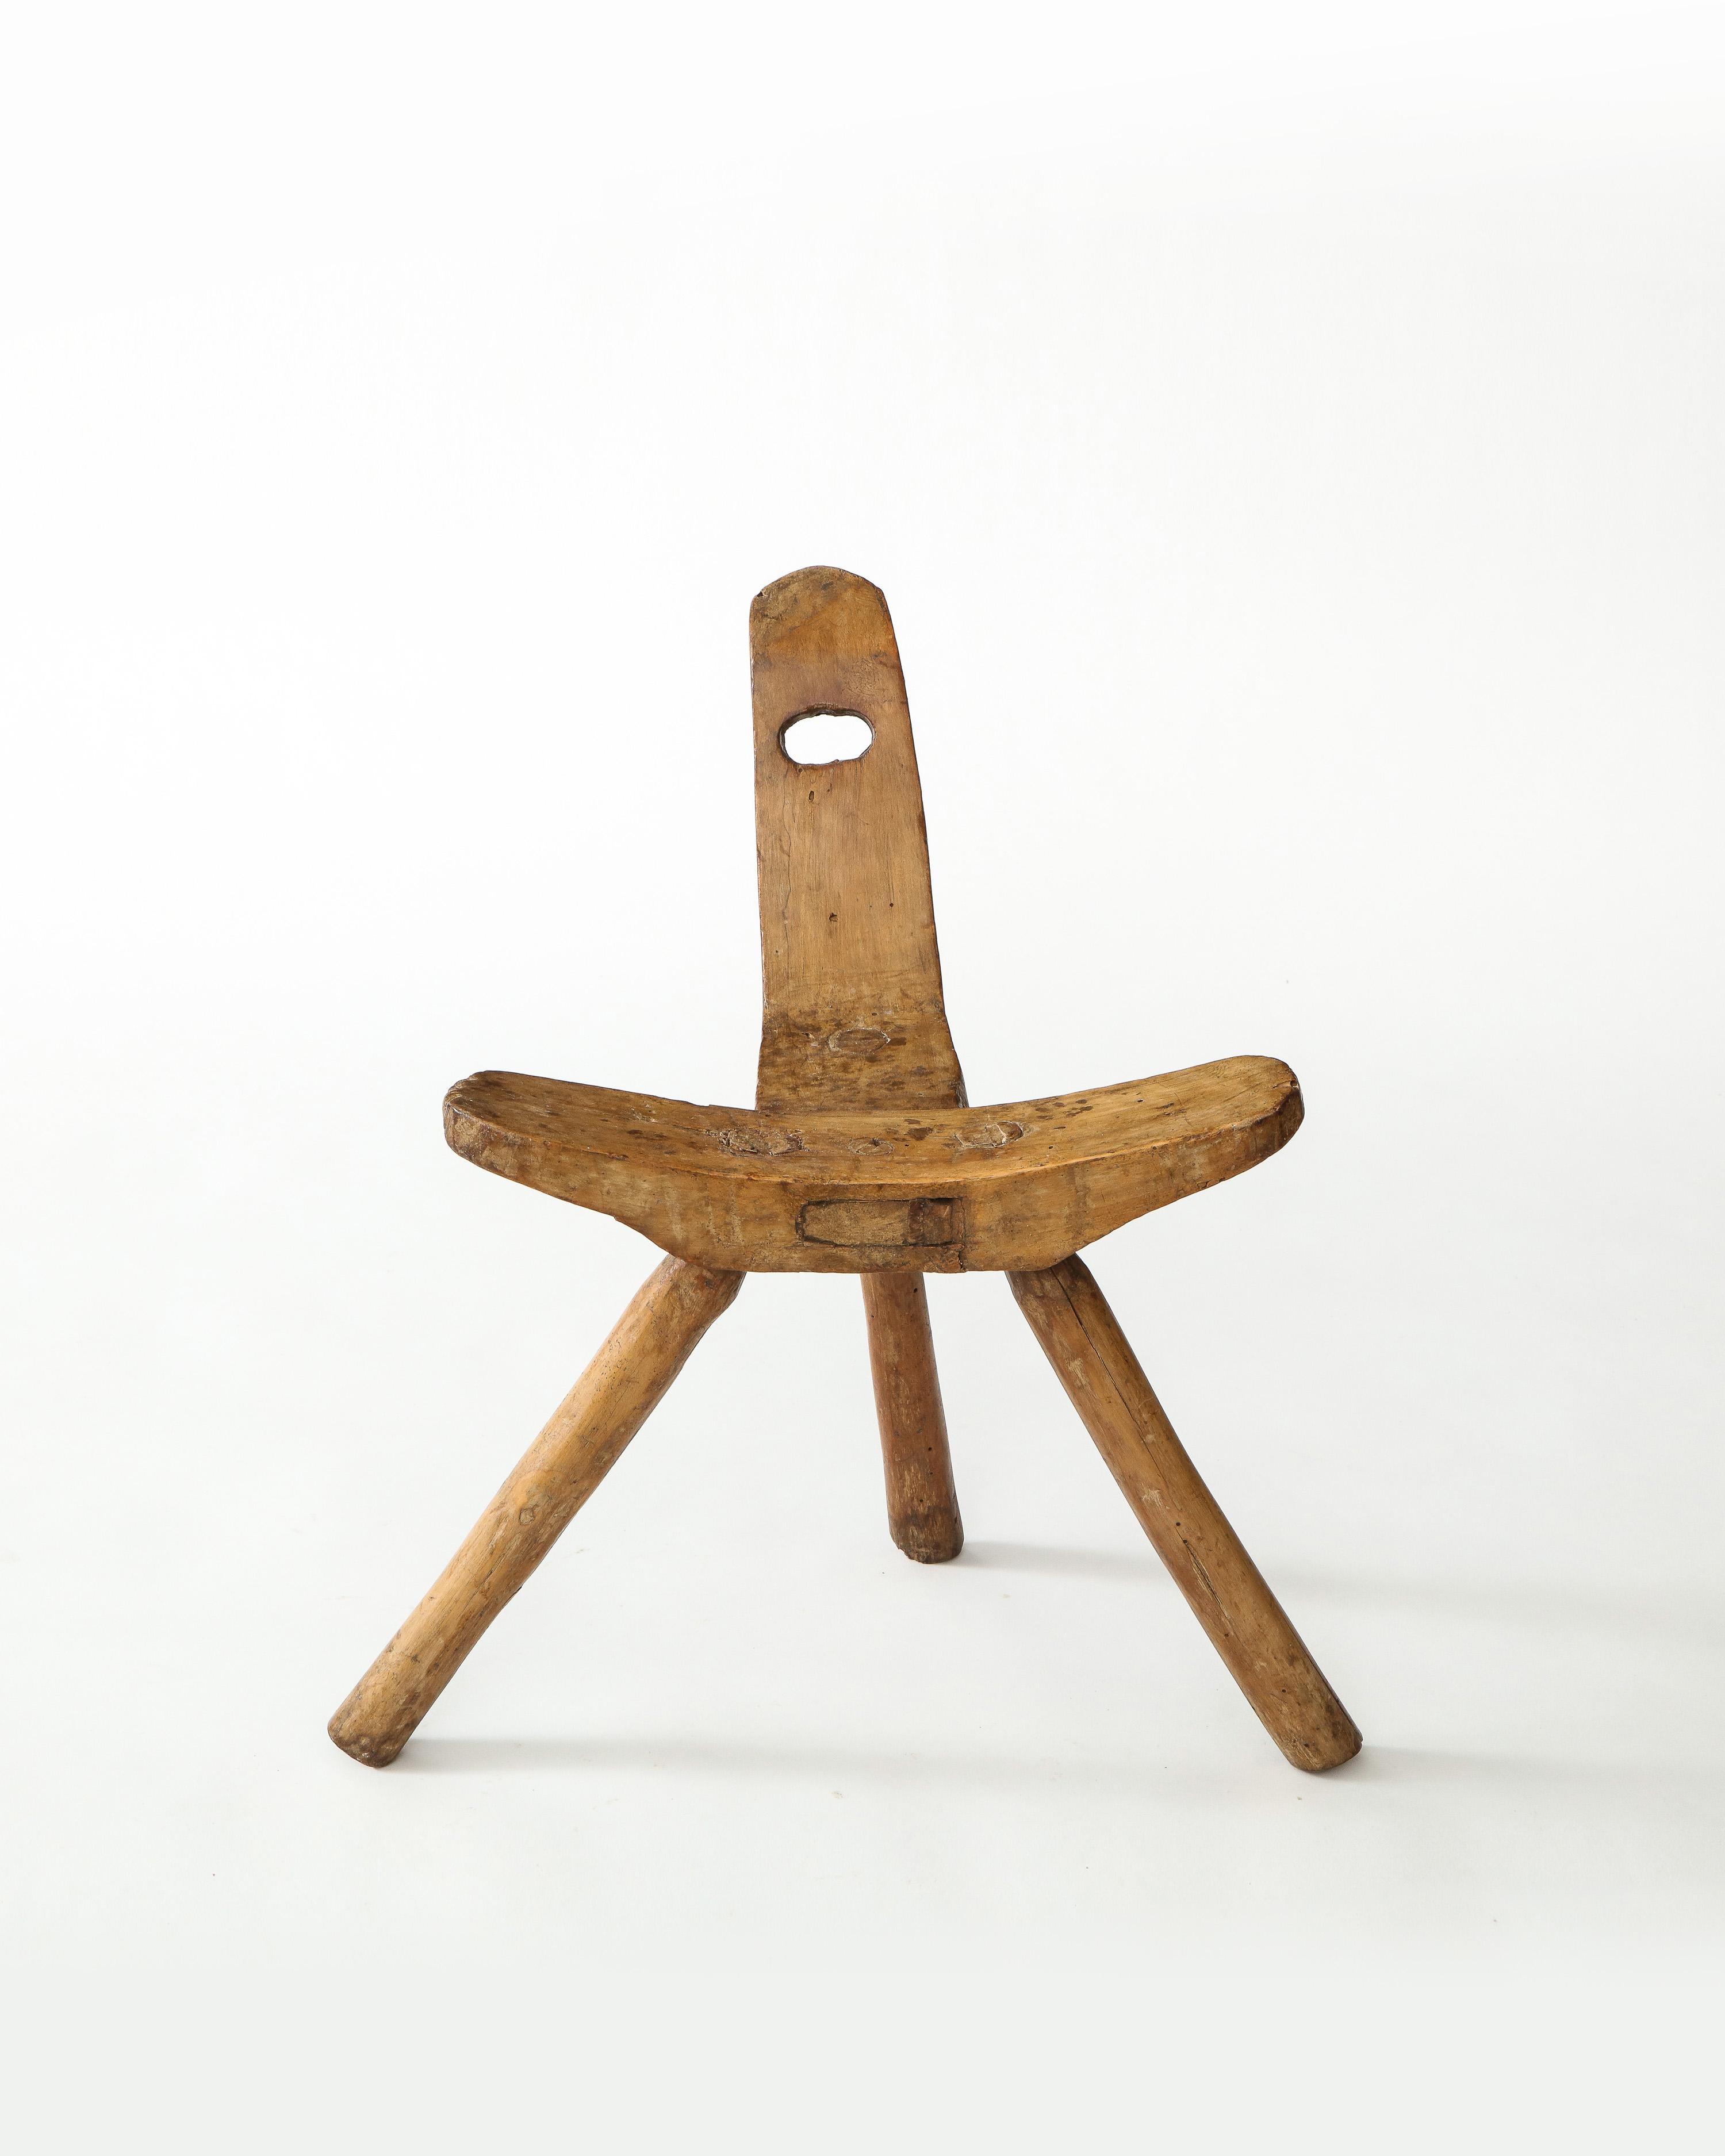 Three-legged Brutalist wooden stool. Back and seat are both composed of large pieces of solid elm. Cool open handle detail. Quite amazing to behold from all vantage points.